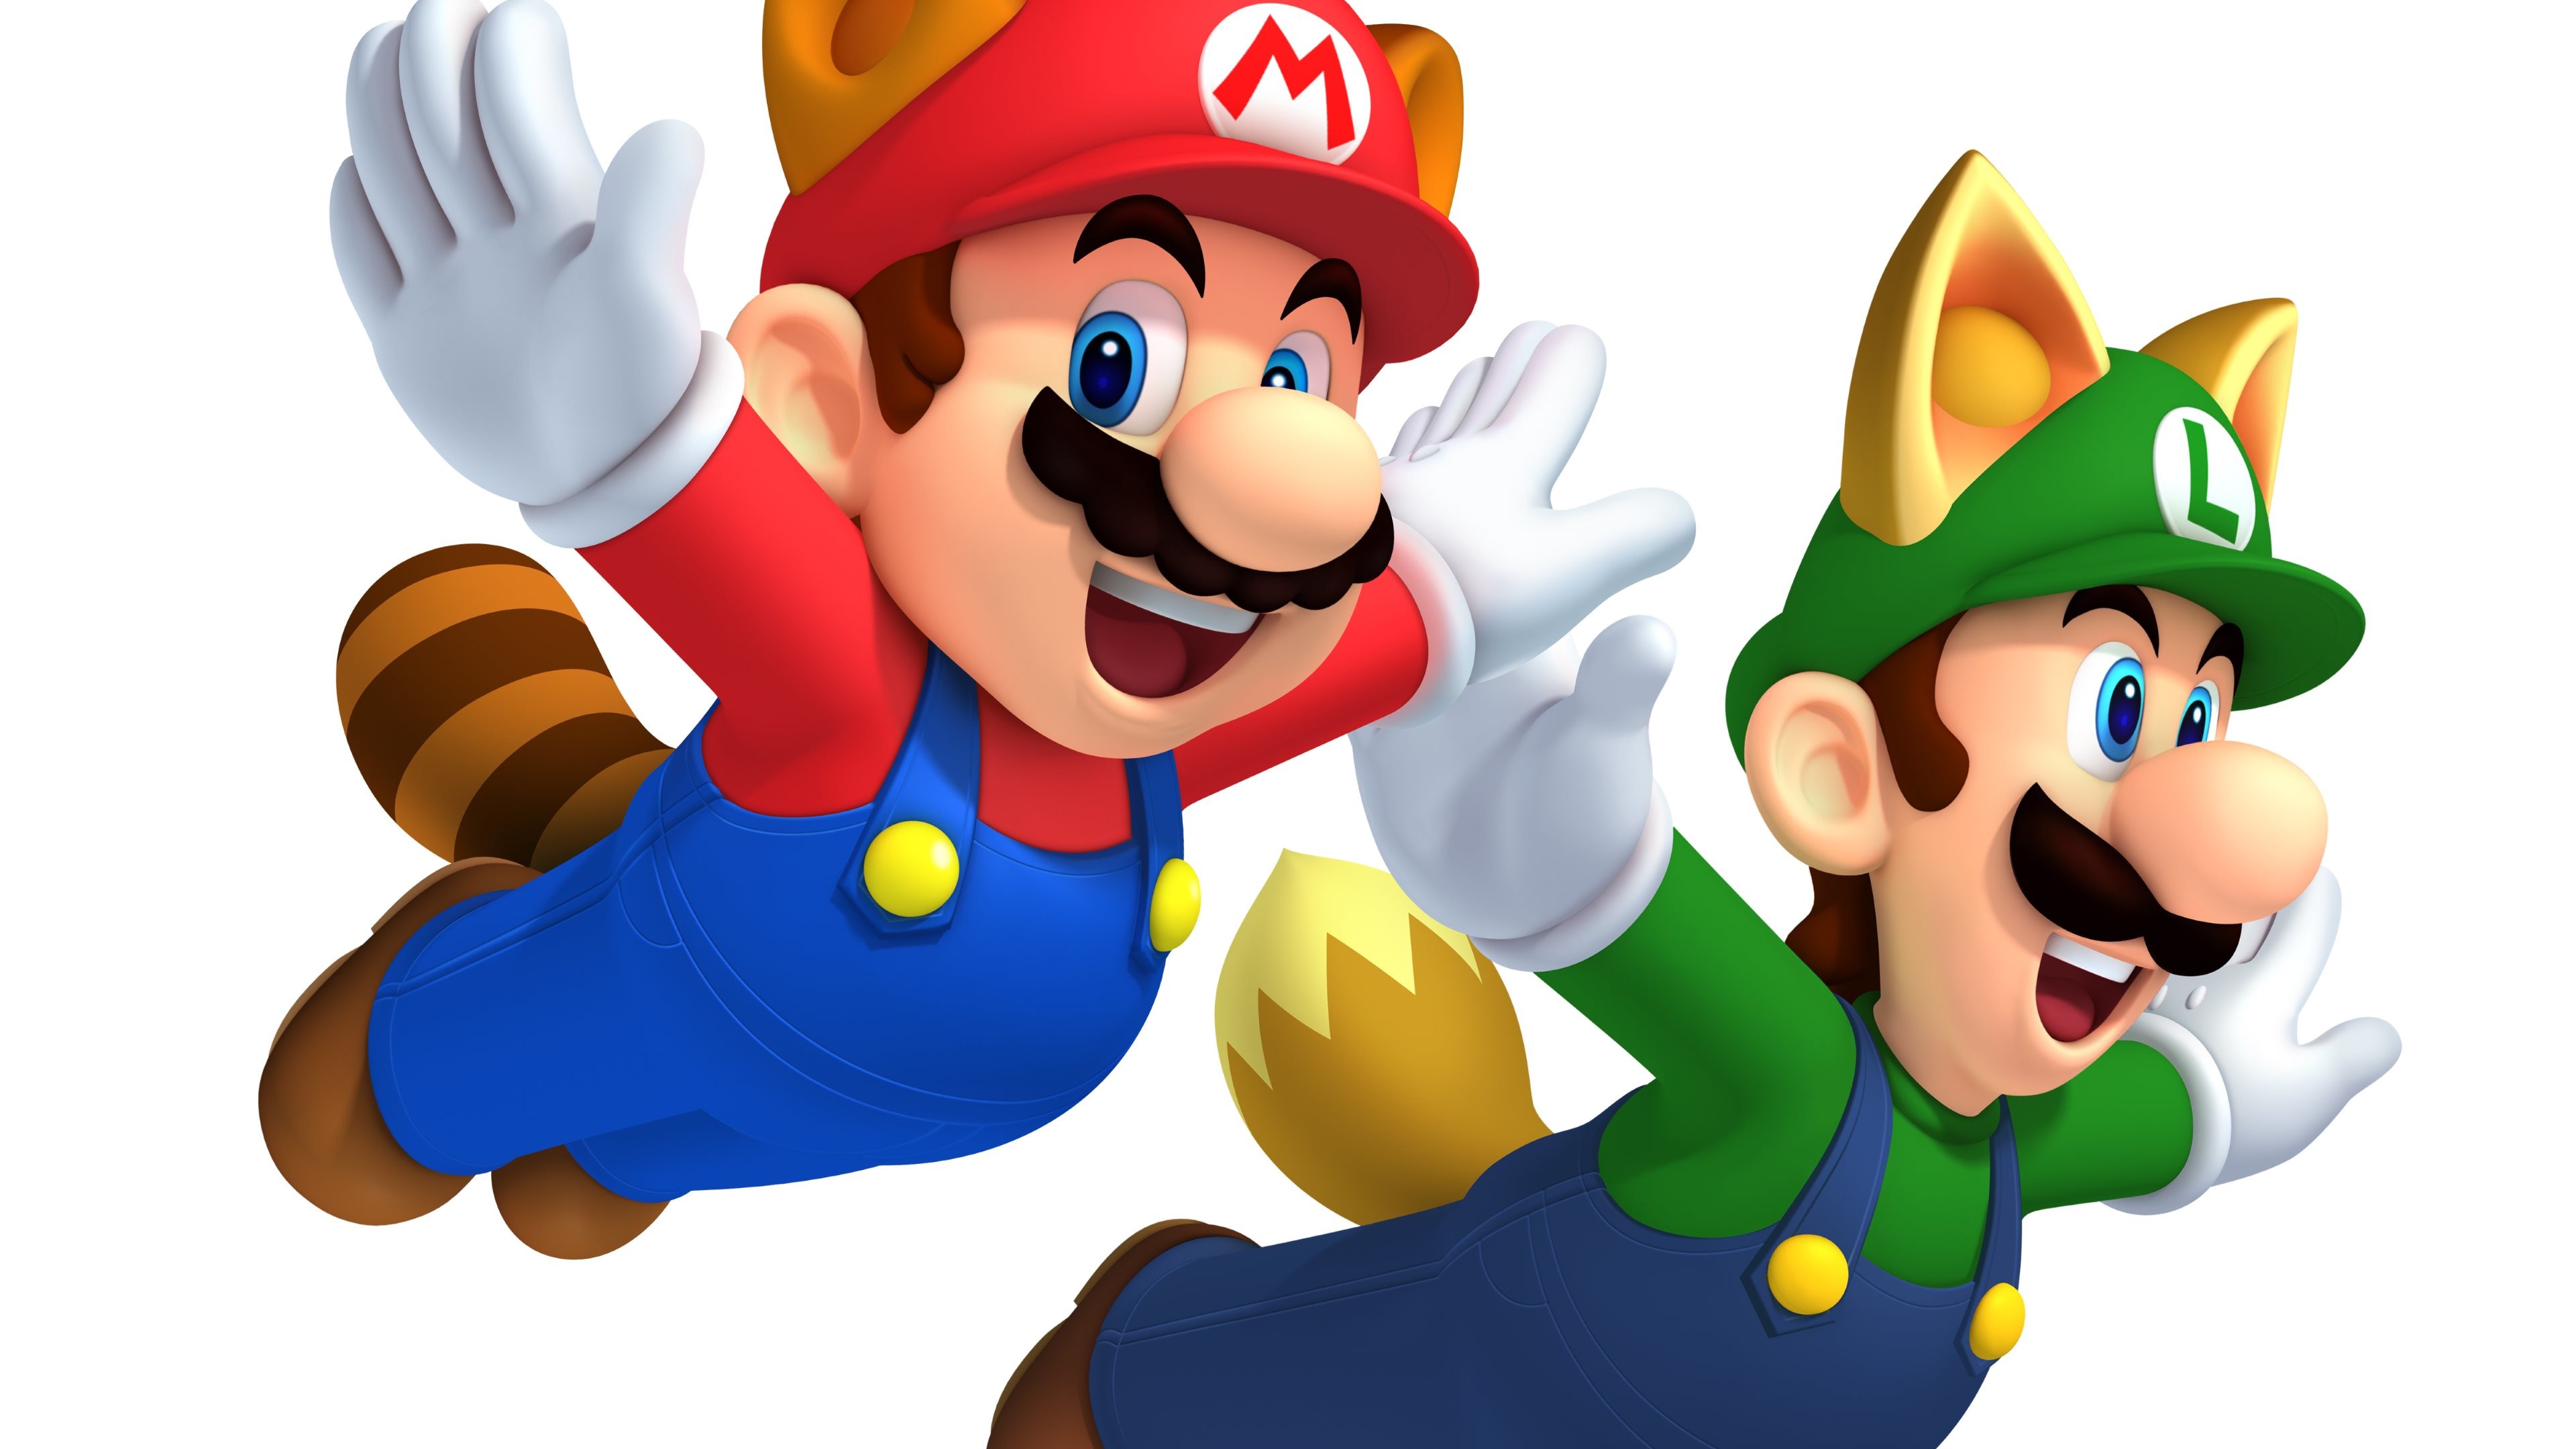 3840x2160 Cool Mario Wallpapers - Wallpapers Browse ...